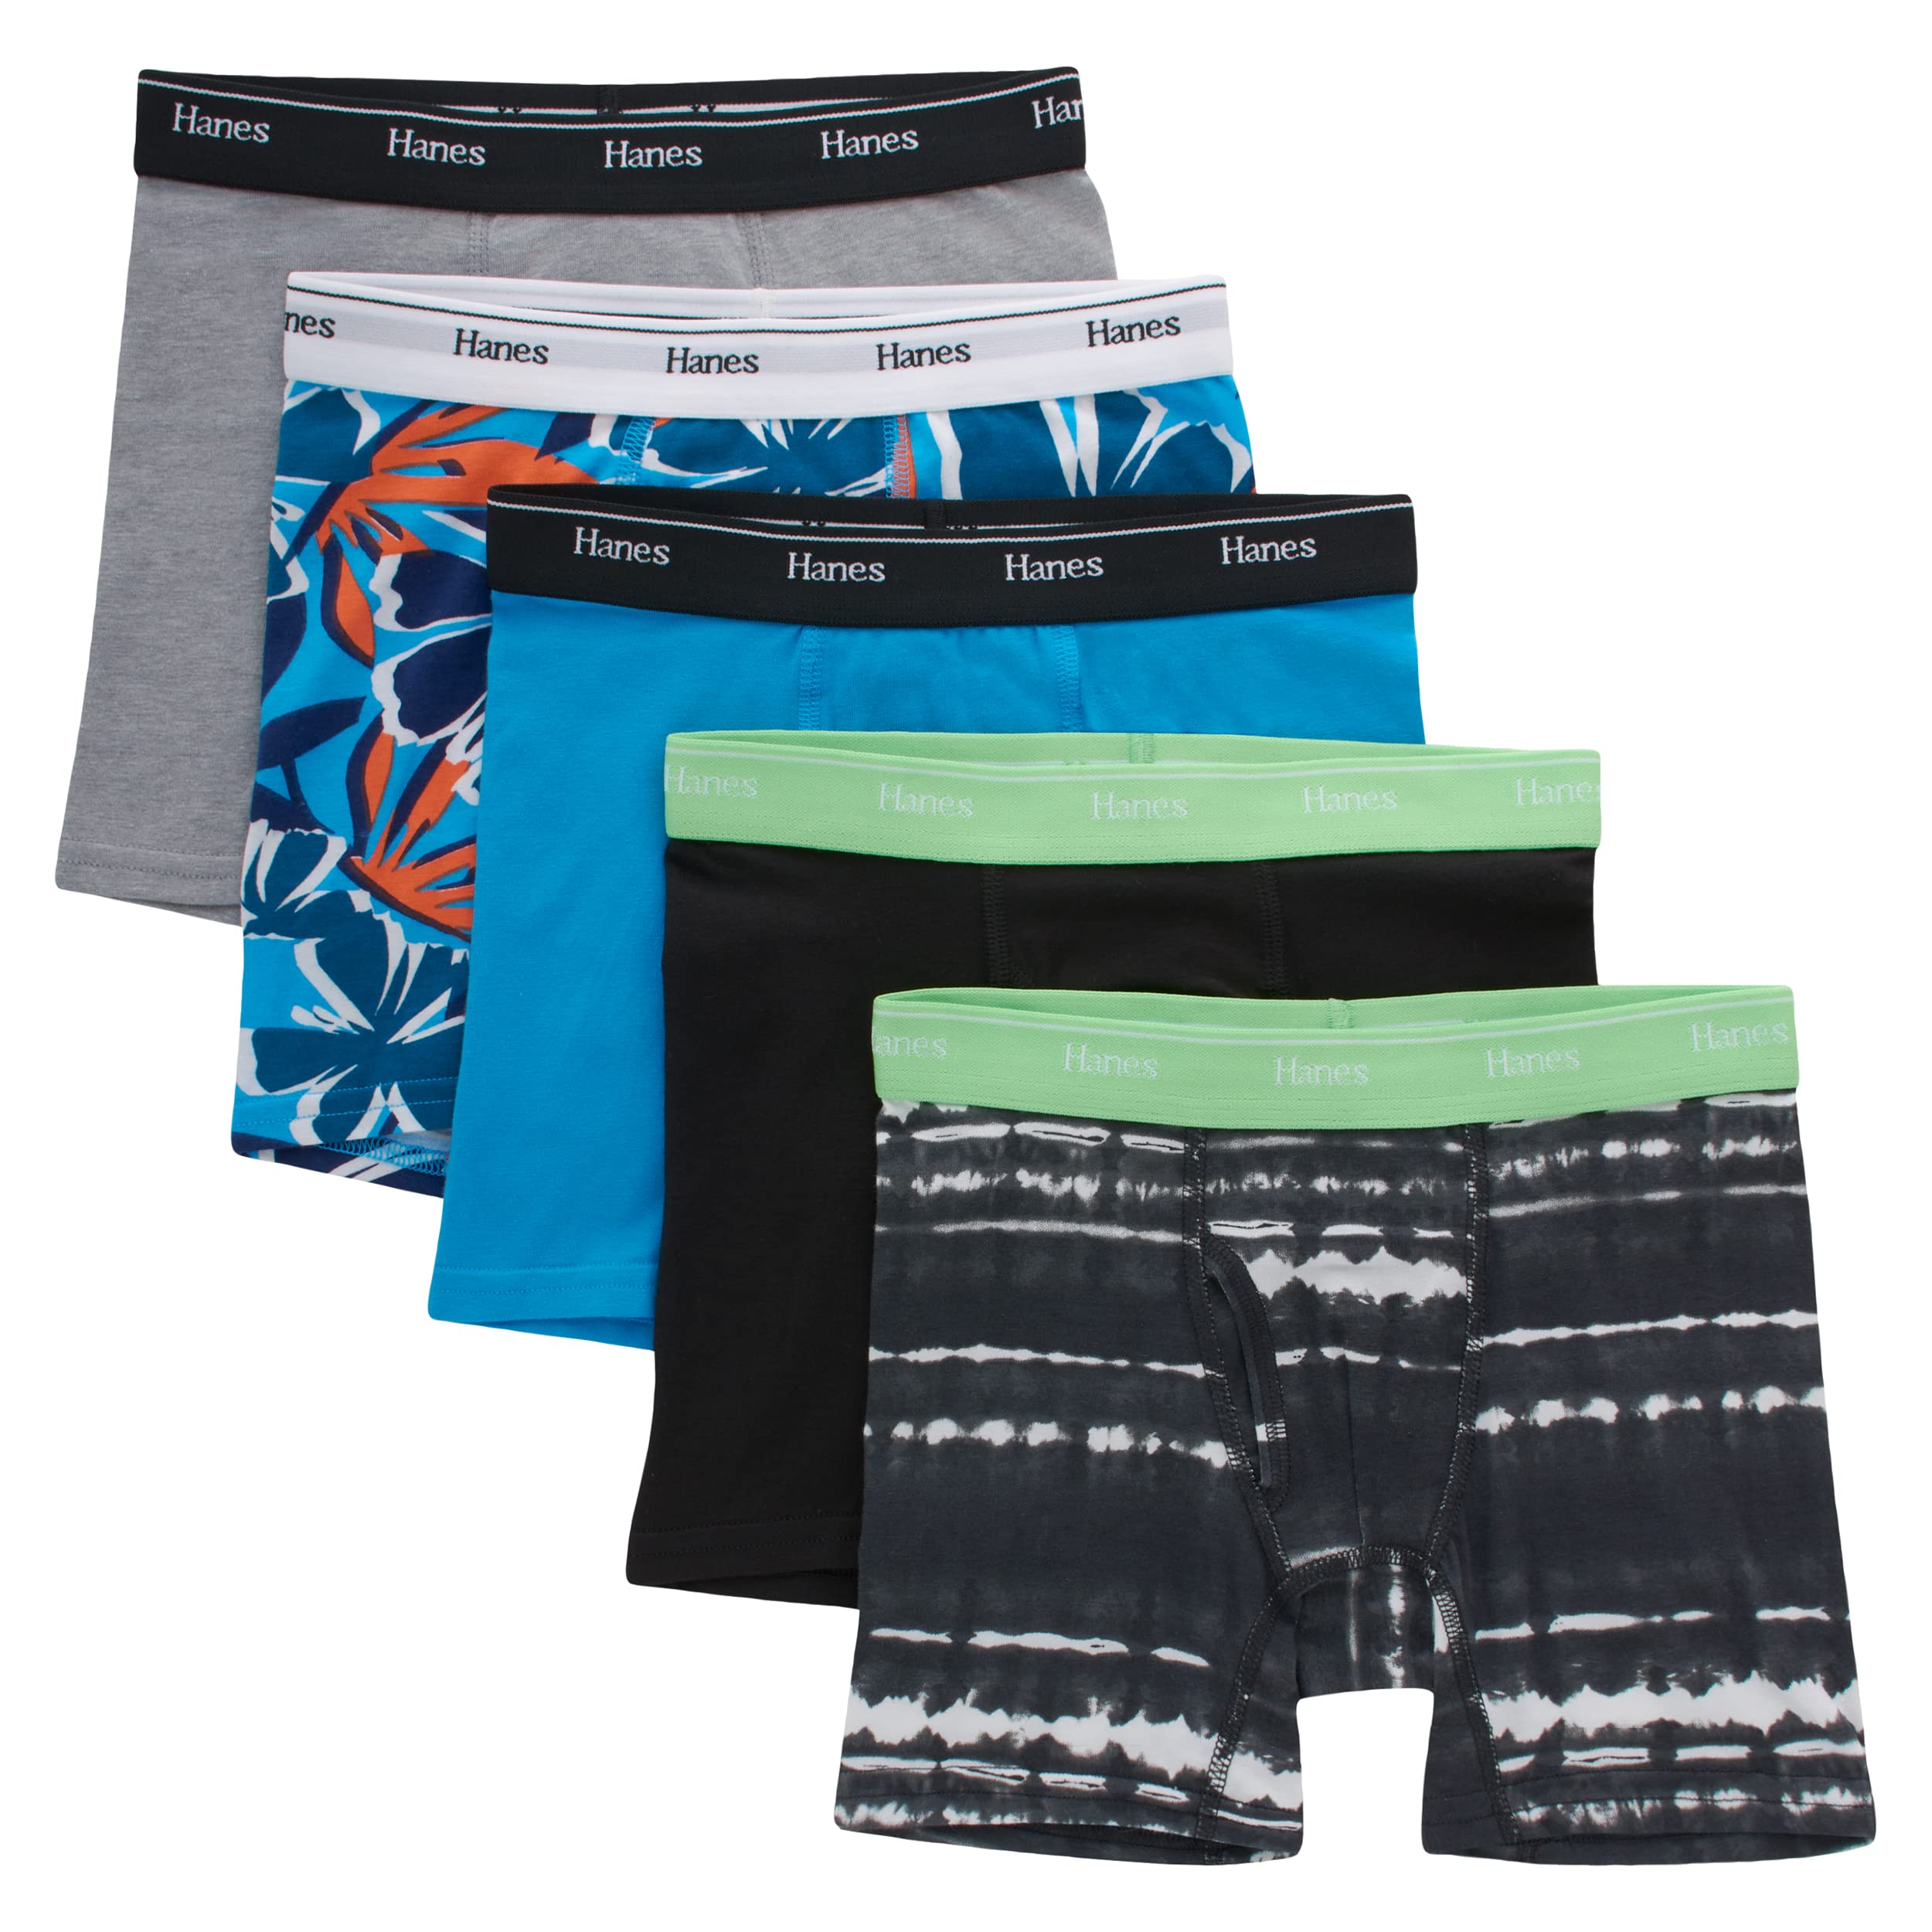 5-Pack Hanes Boys' Original Moisture-Wicking Boxer Briefs Underwear (Size XL, Black/Blue/Gray) $7 ($1.40 Each) + Free Shipping w/ Prime or on $35+